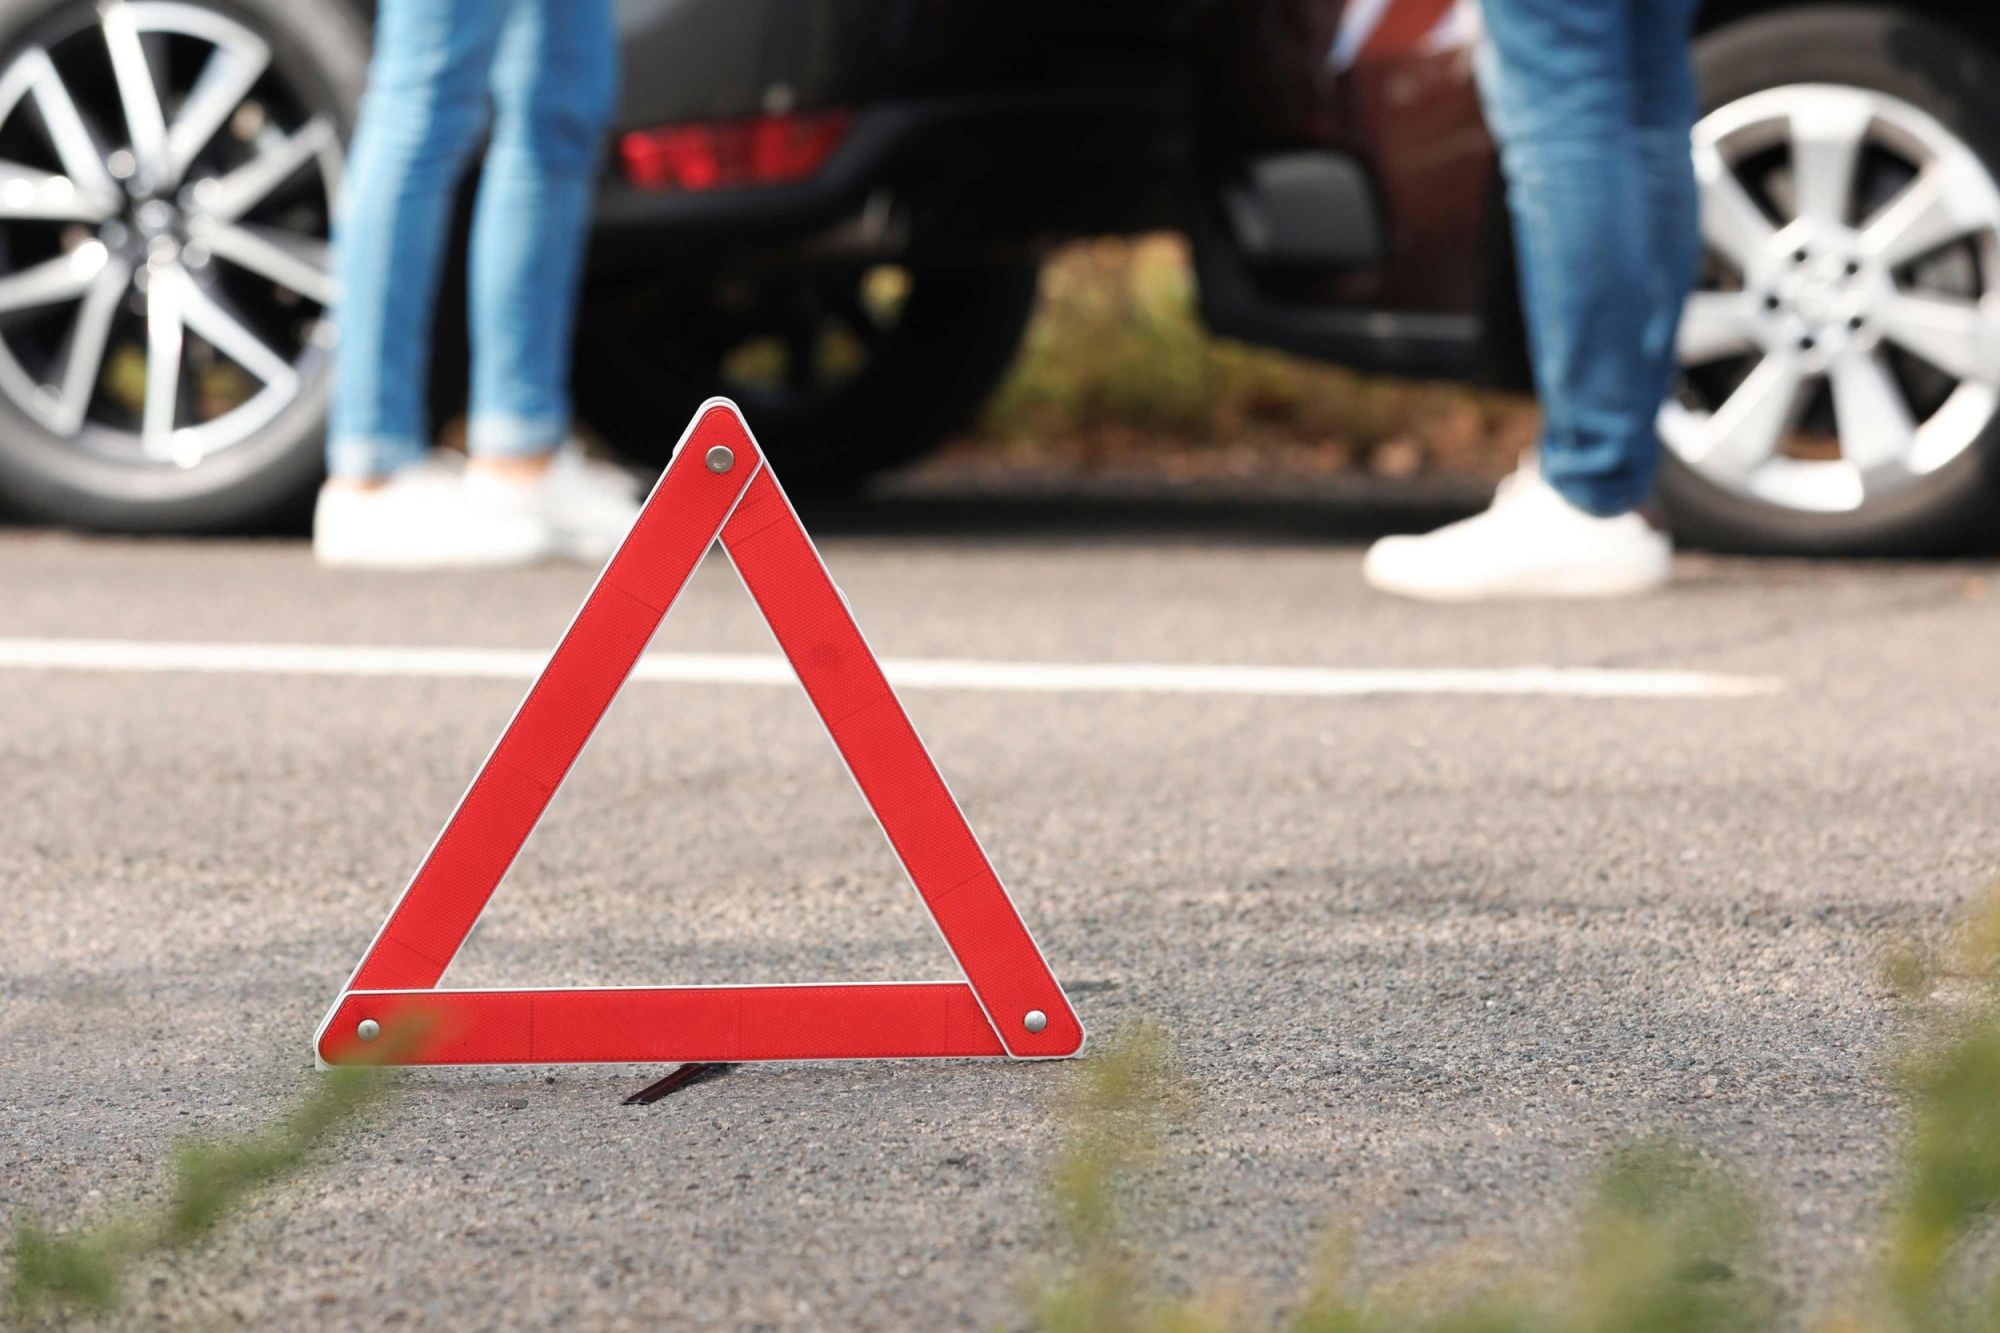 The impact of not having the Road Accident Fund in place